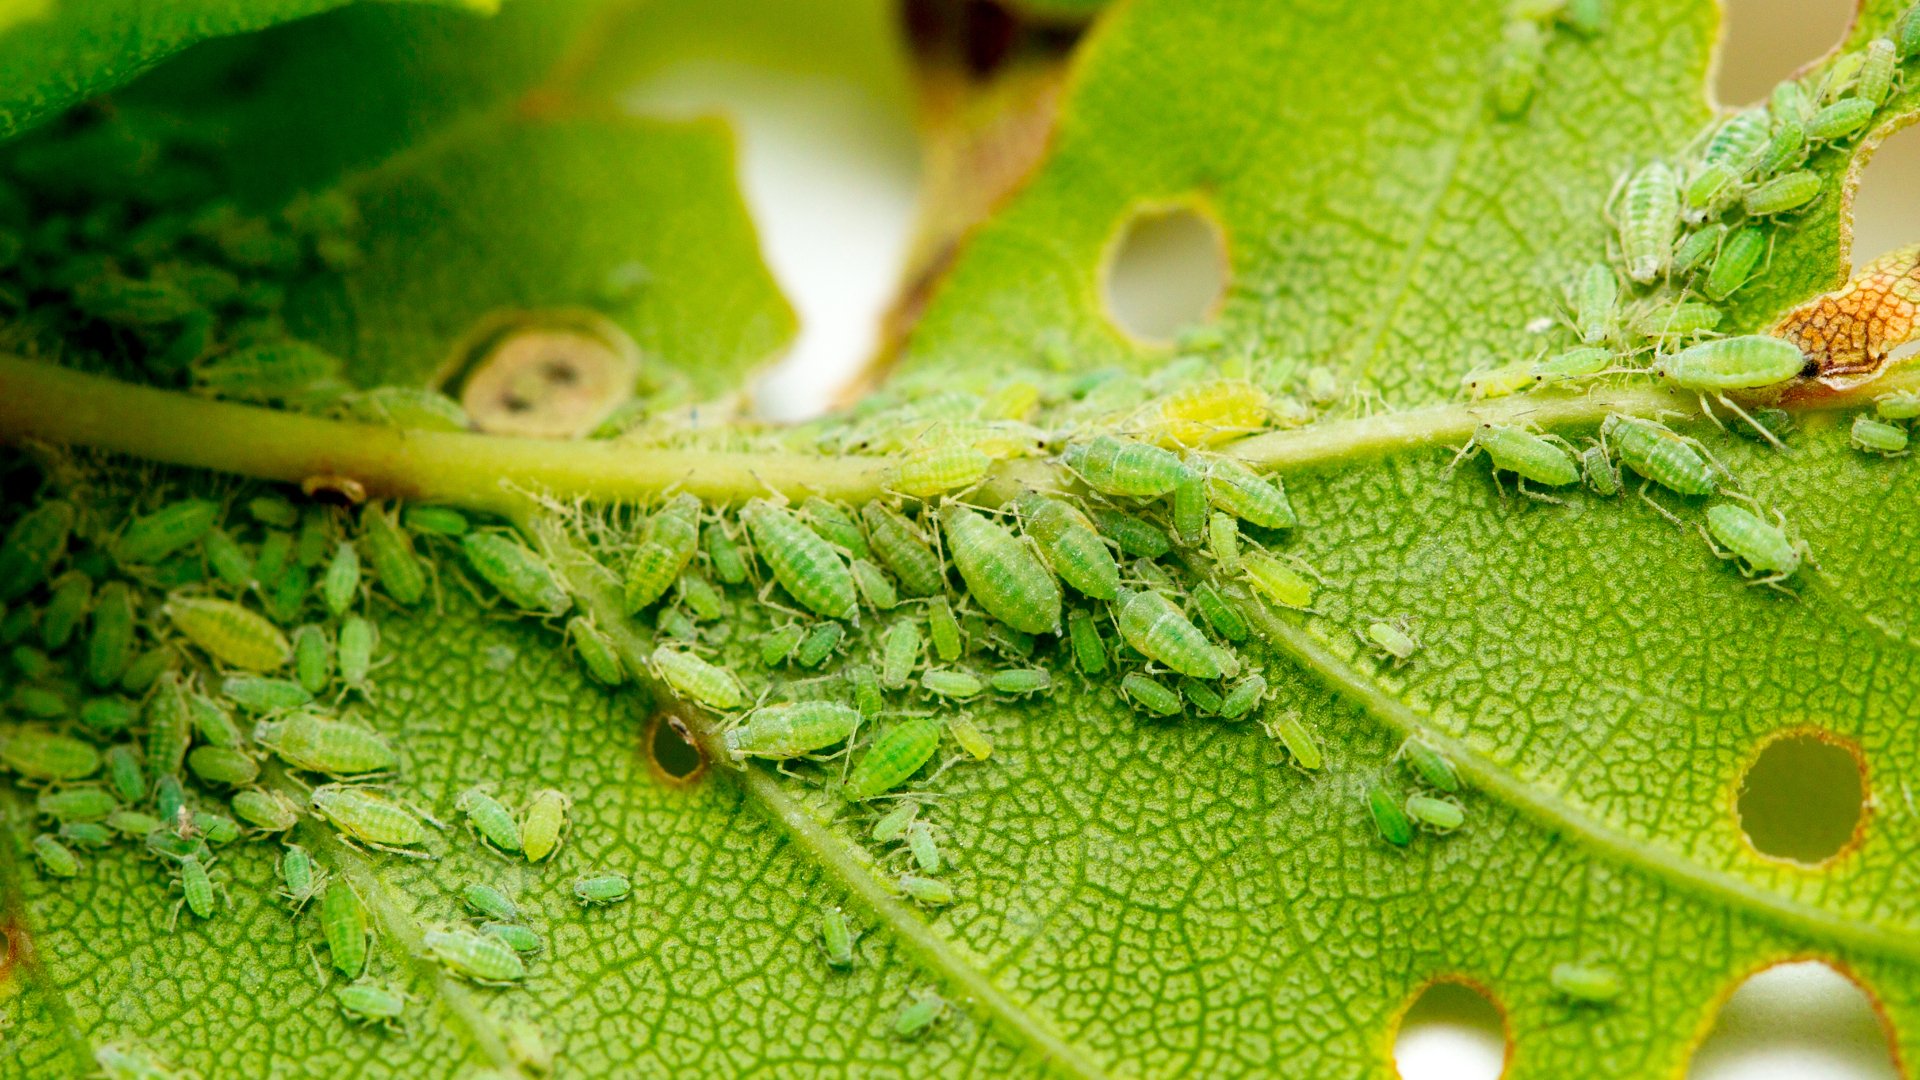 Greenbugs - What You Should Do if These Insects Show Up on Your Lawn